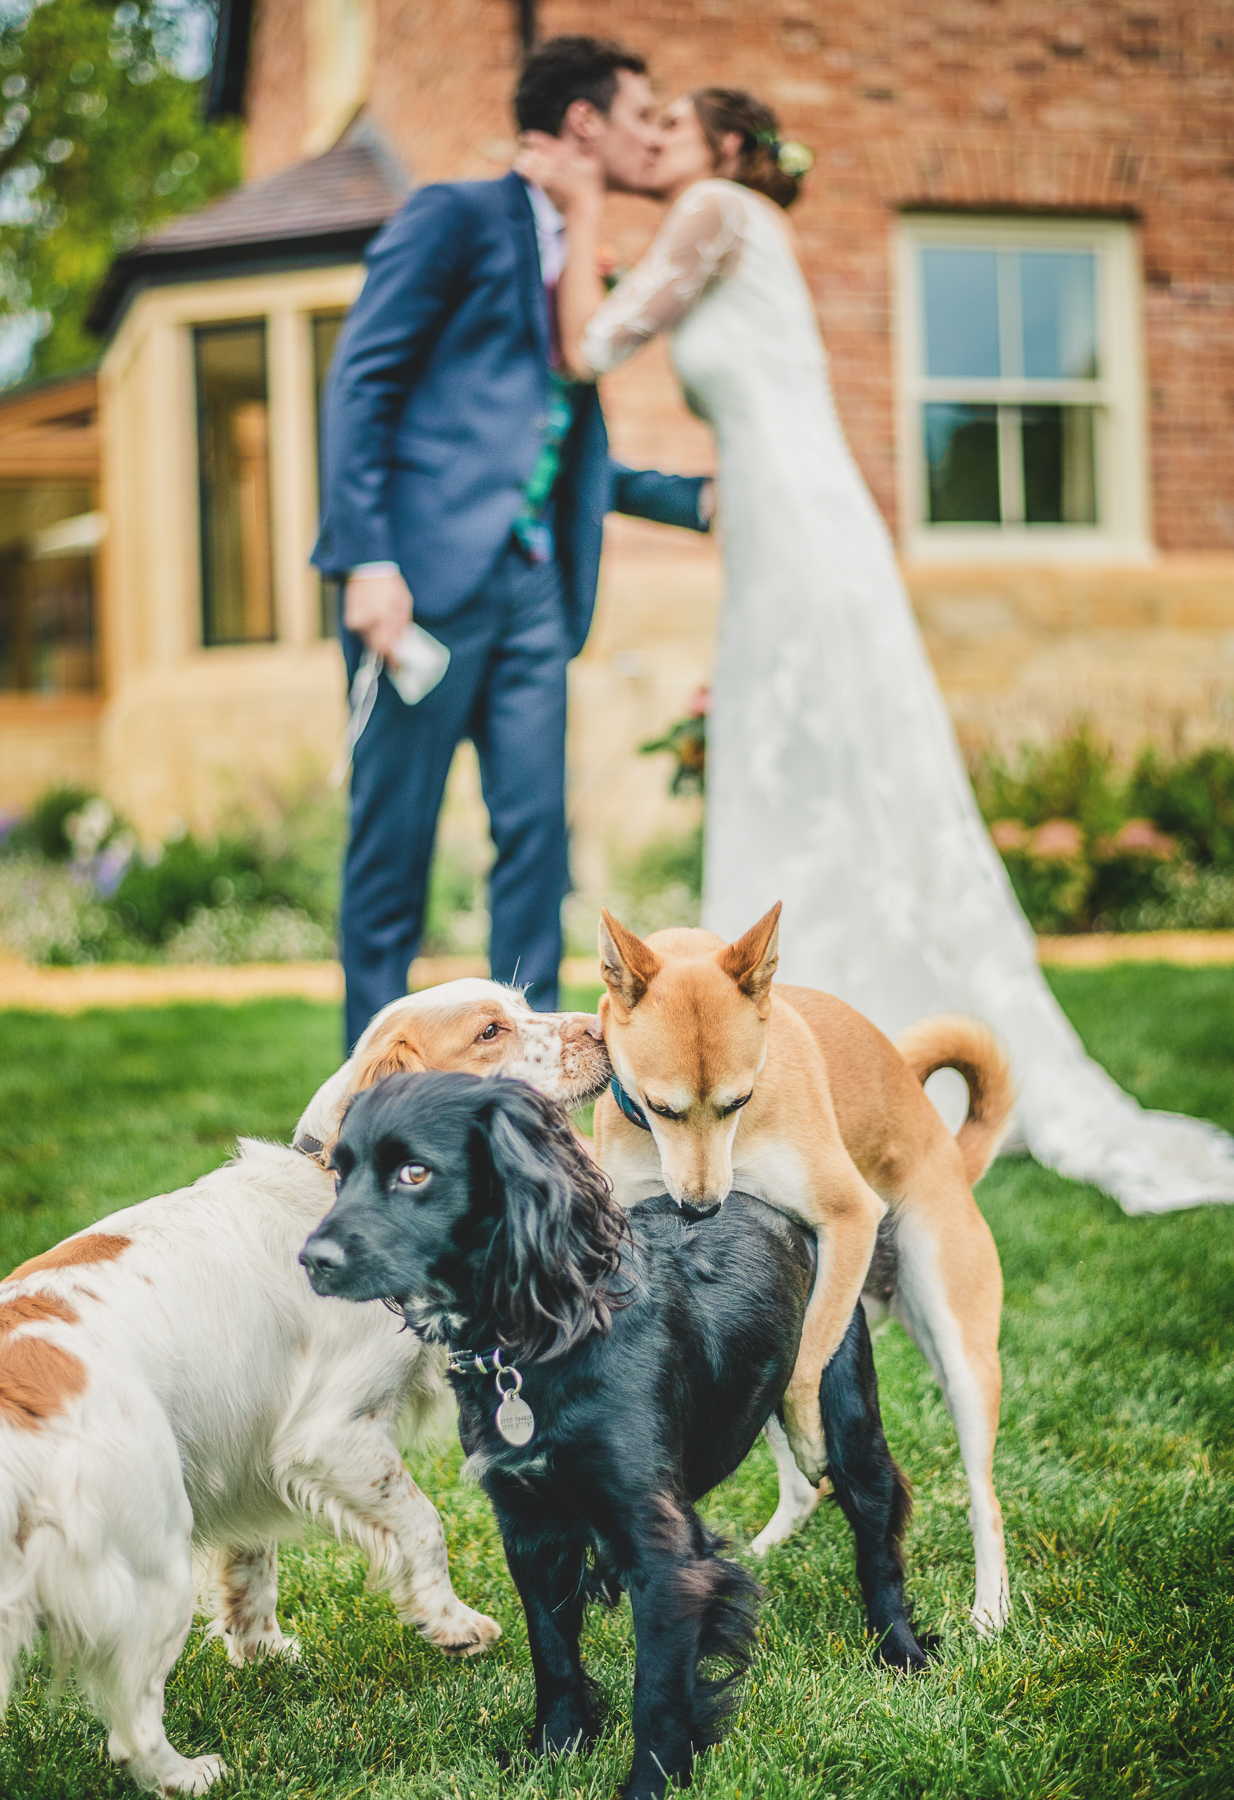 Funny Photo of dogs at a wedding